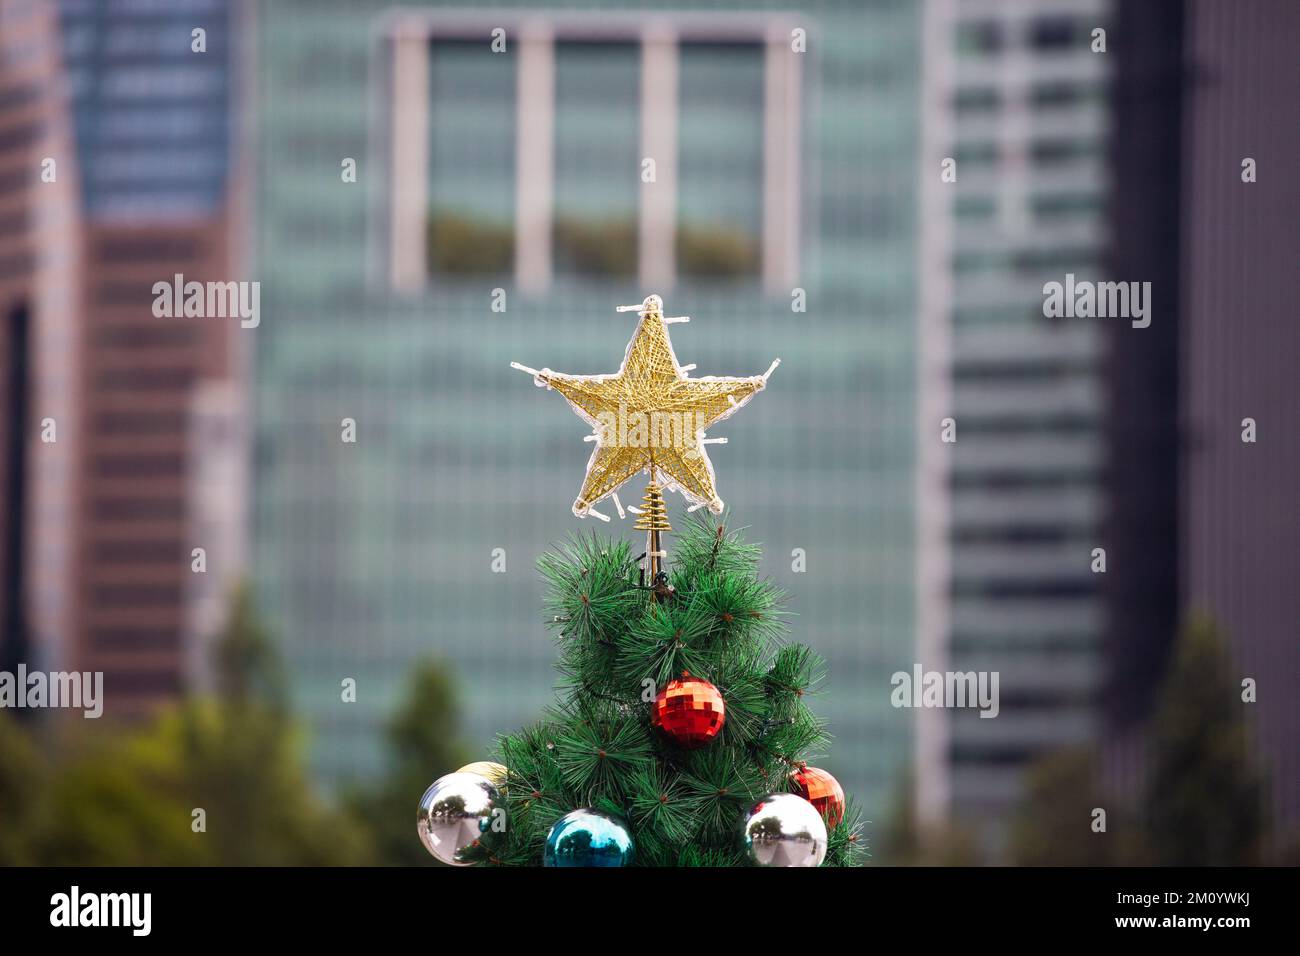 Close up view of the top of Christmas tree with a gold star decoration at outdoor environment against a modern building as background. Stock Photo